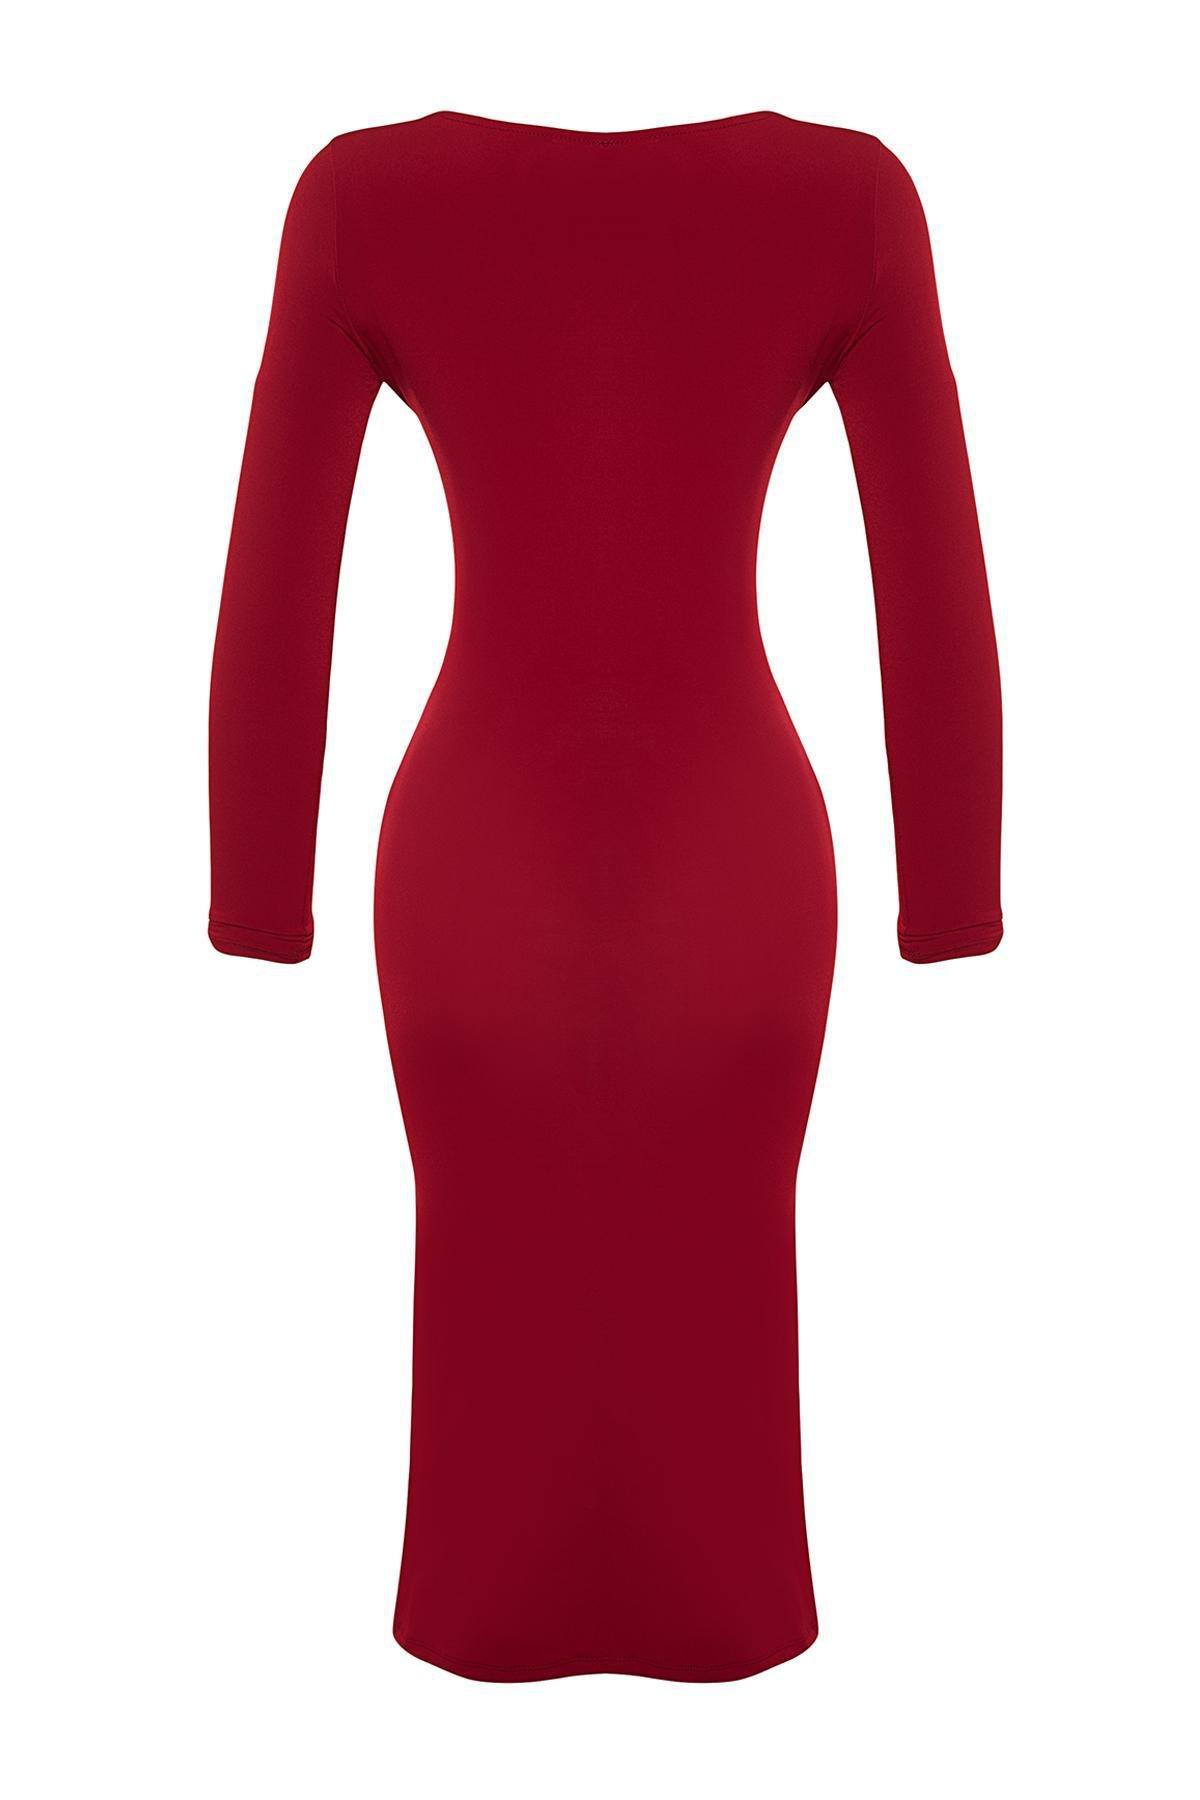 Trendyol - Red Square Neck Pleated Fitted Knitted Dress